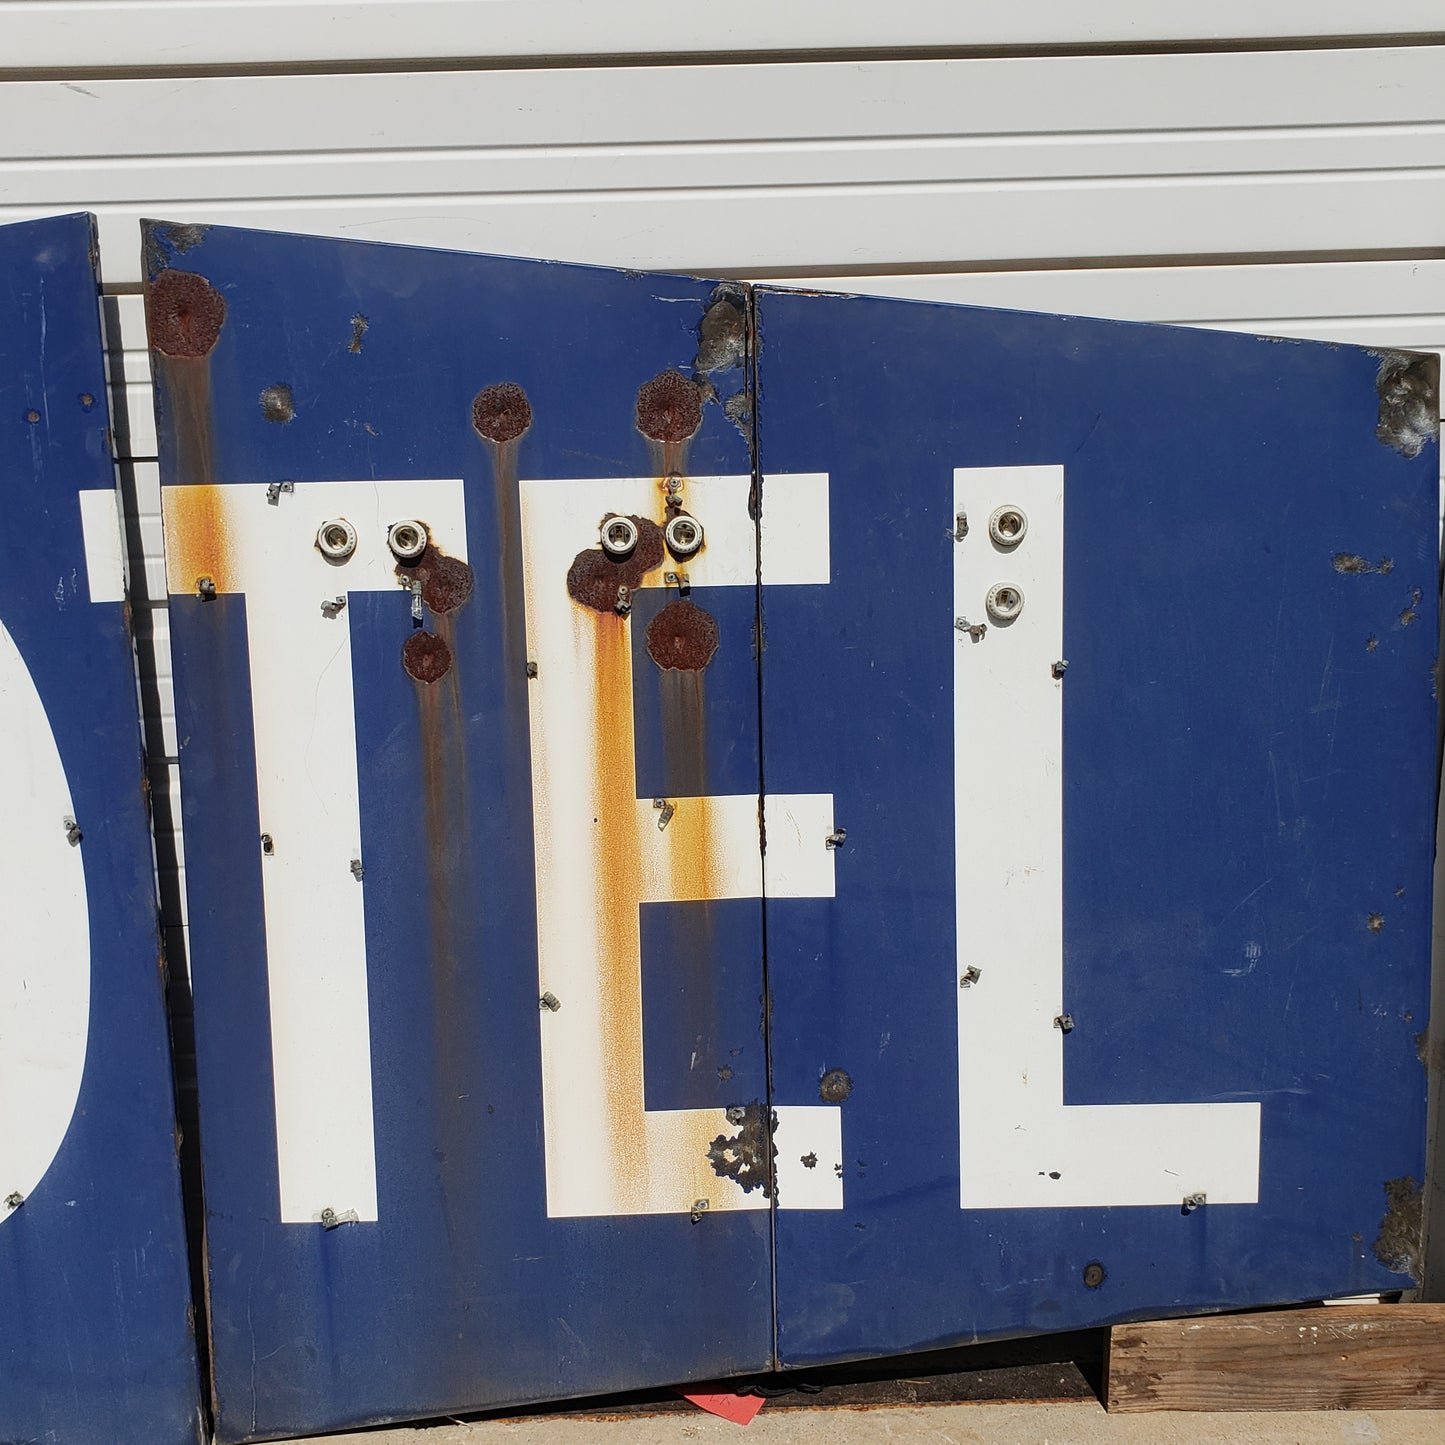 Blue and White “MOTEL" Sign